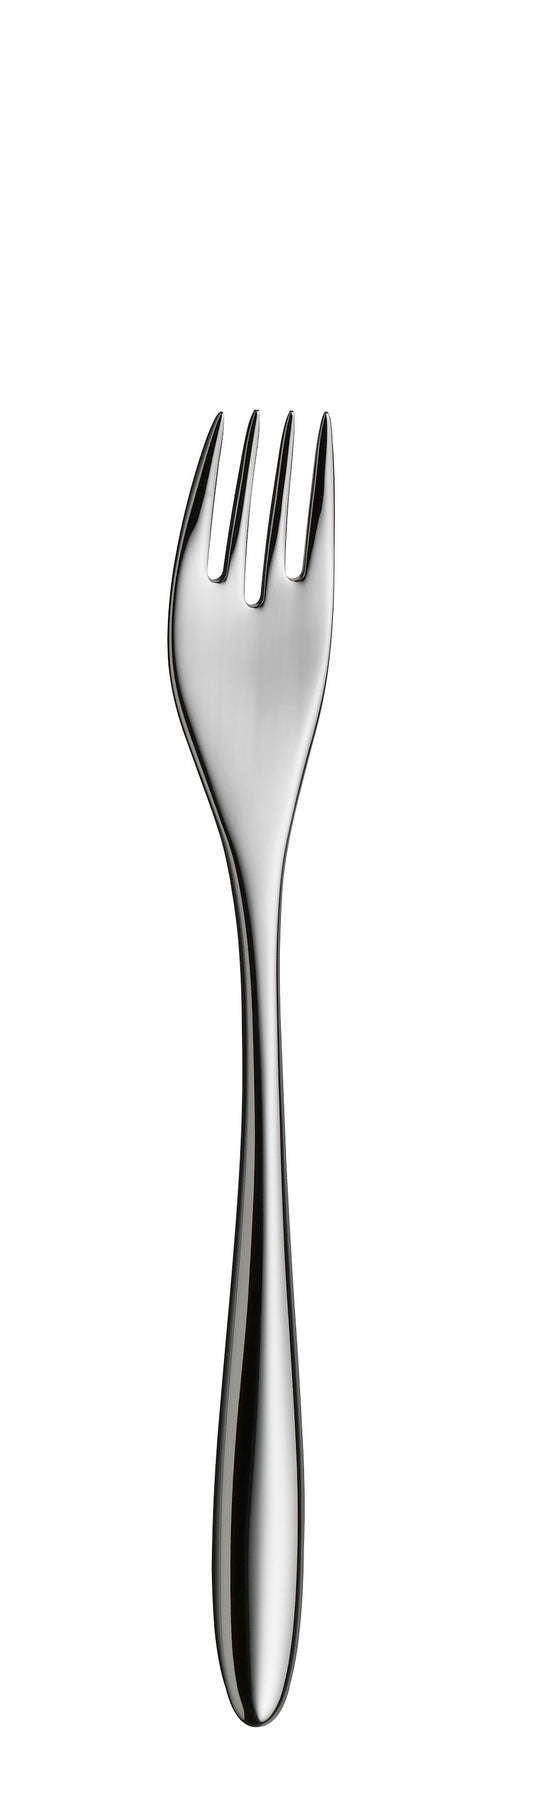 Fish fork AVES silver plated 190mm